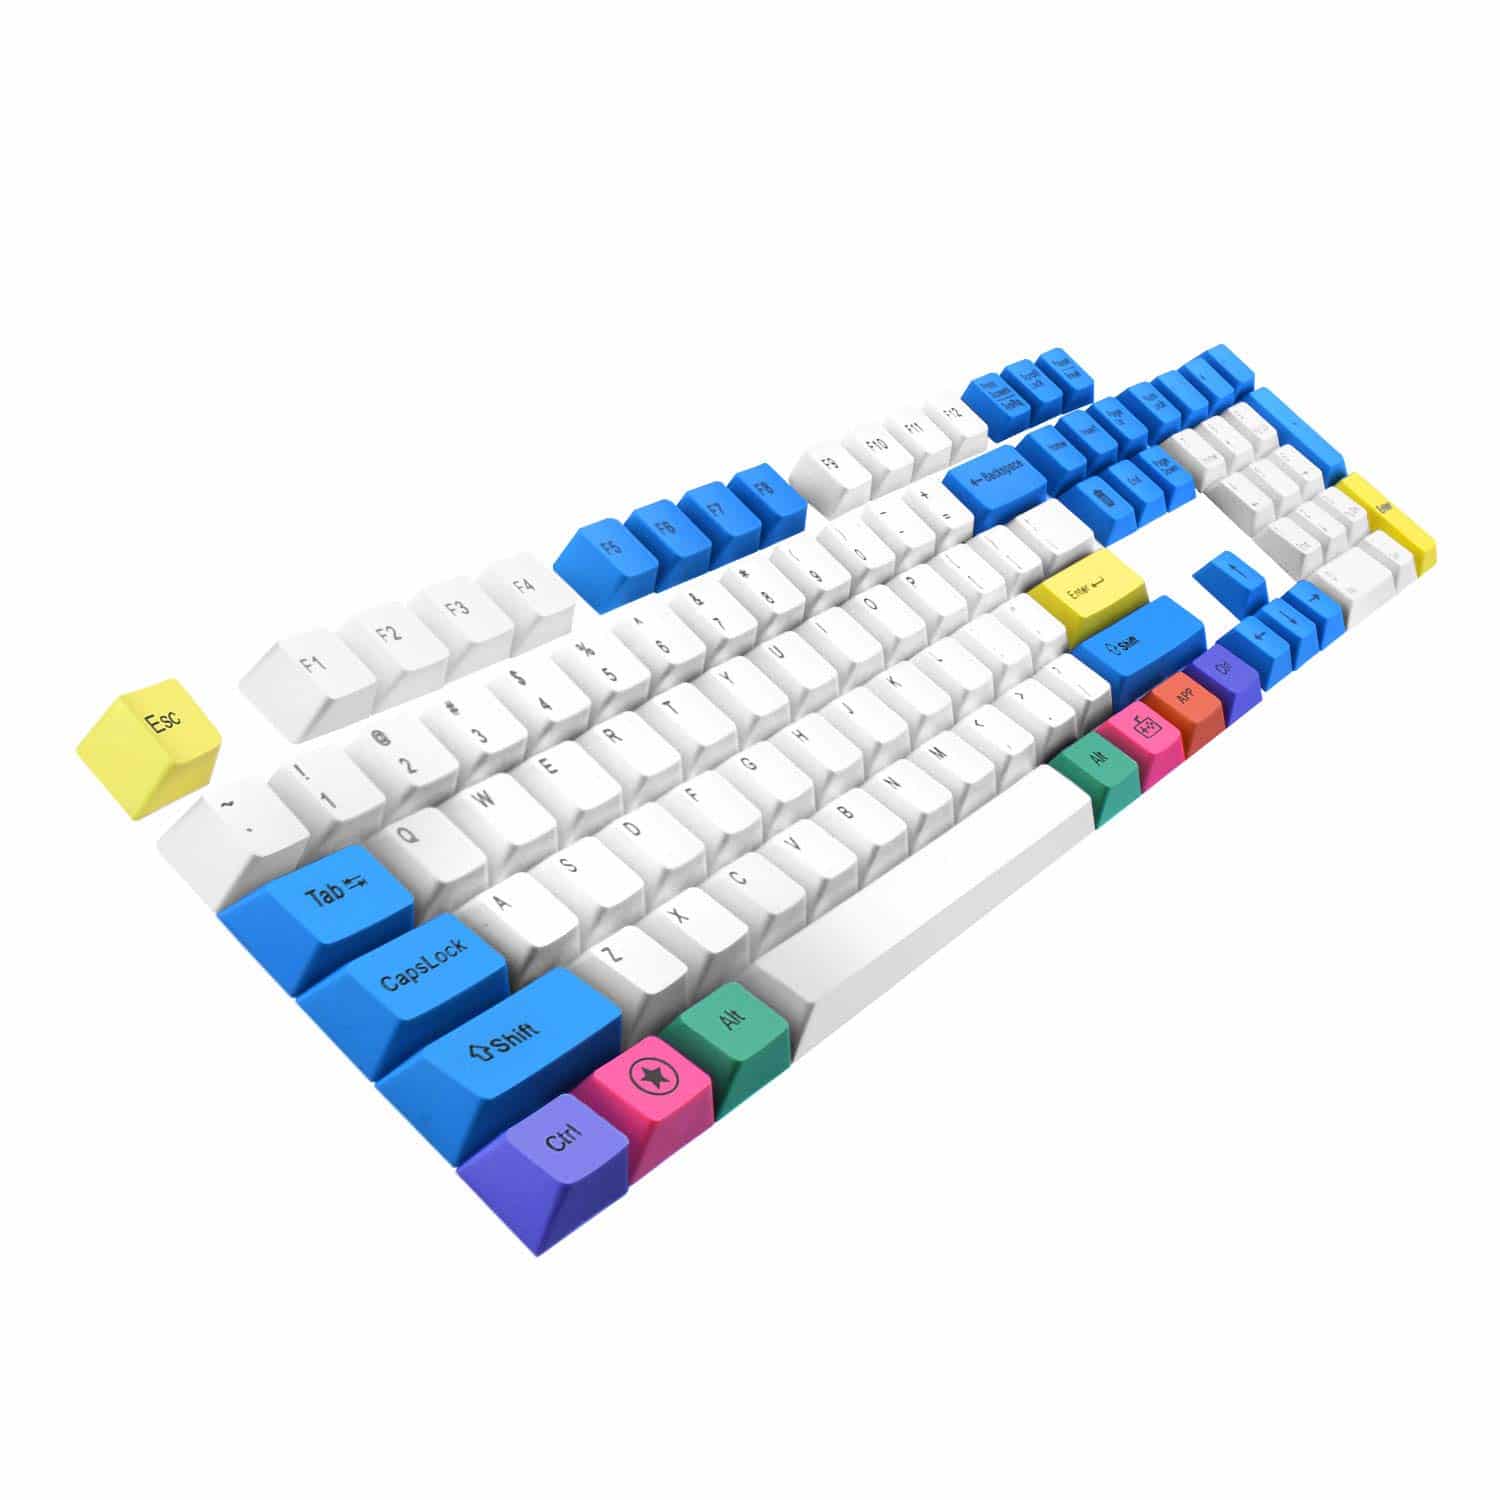 HAVIT KC22 PBT Keycaps with Puller - Pudding, Double Shot, for Cherry